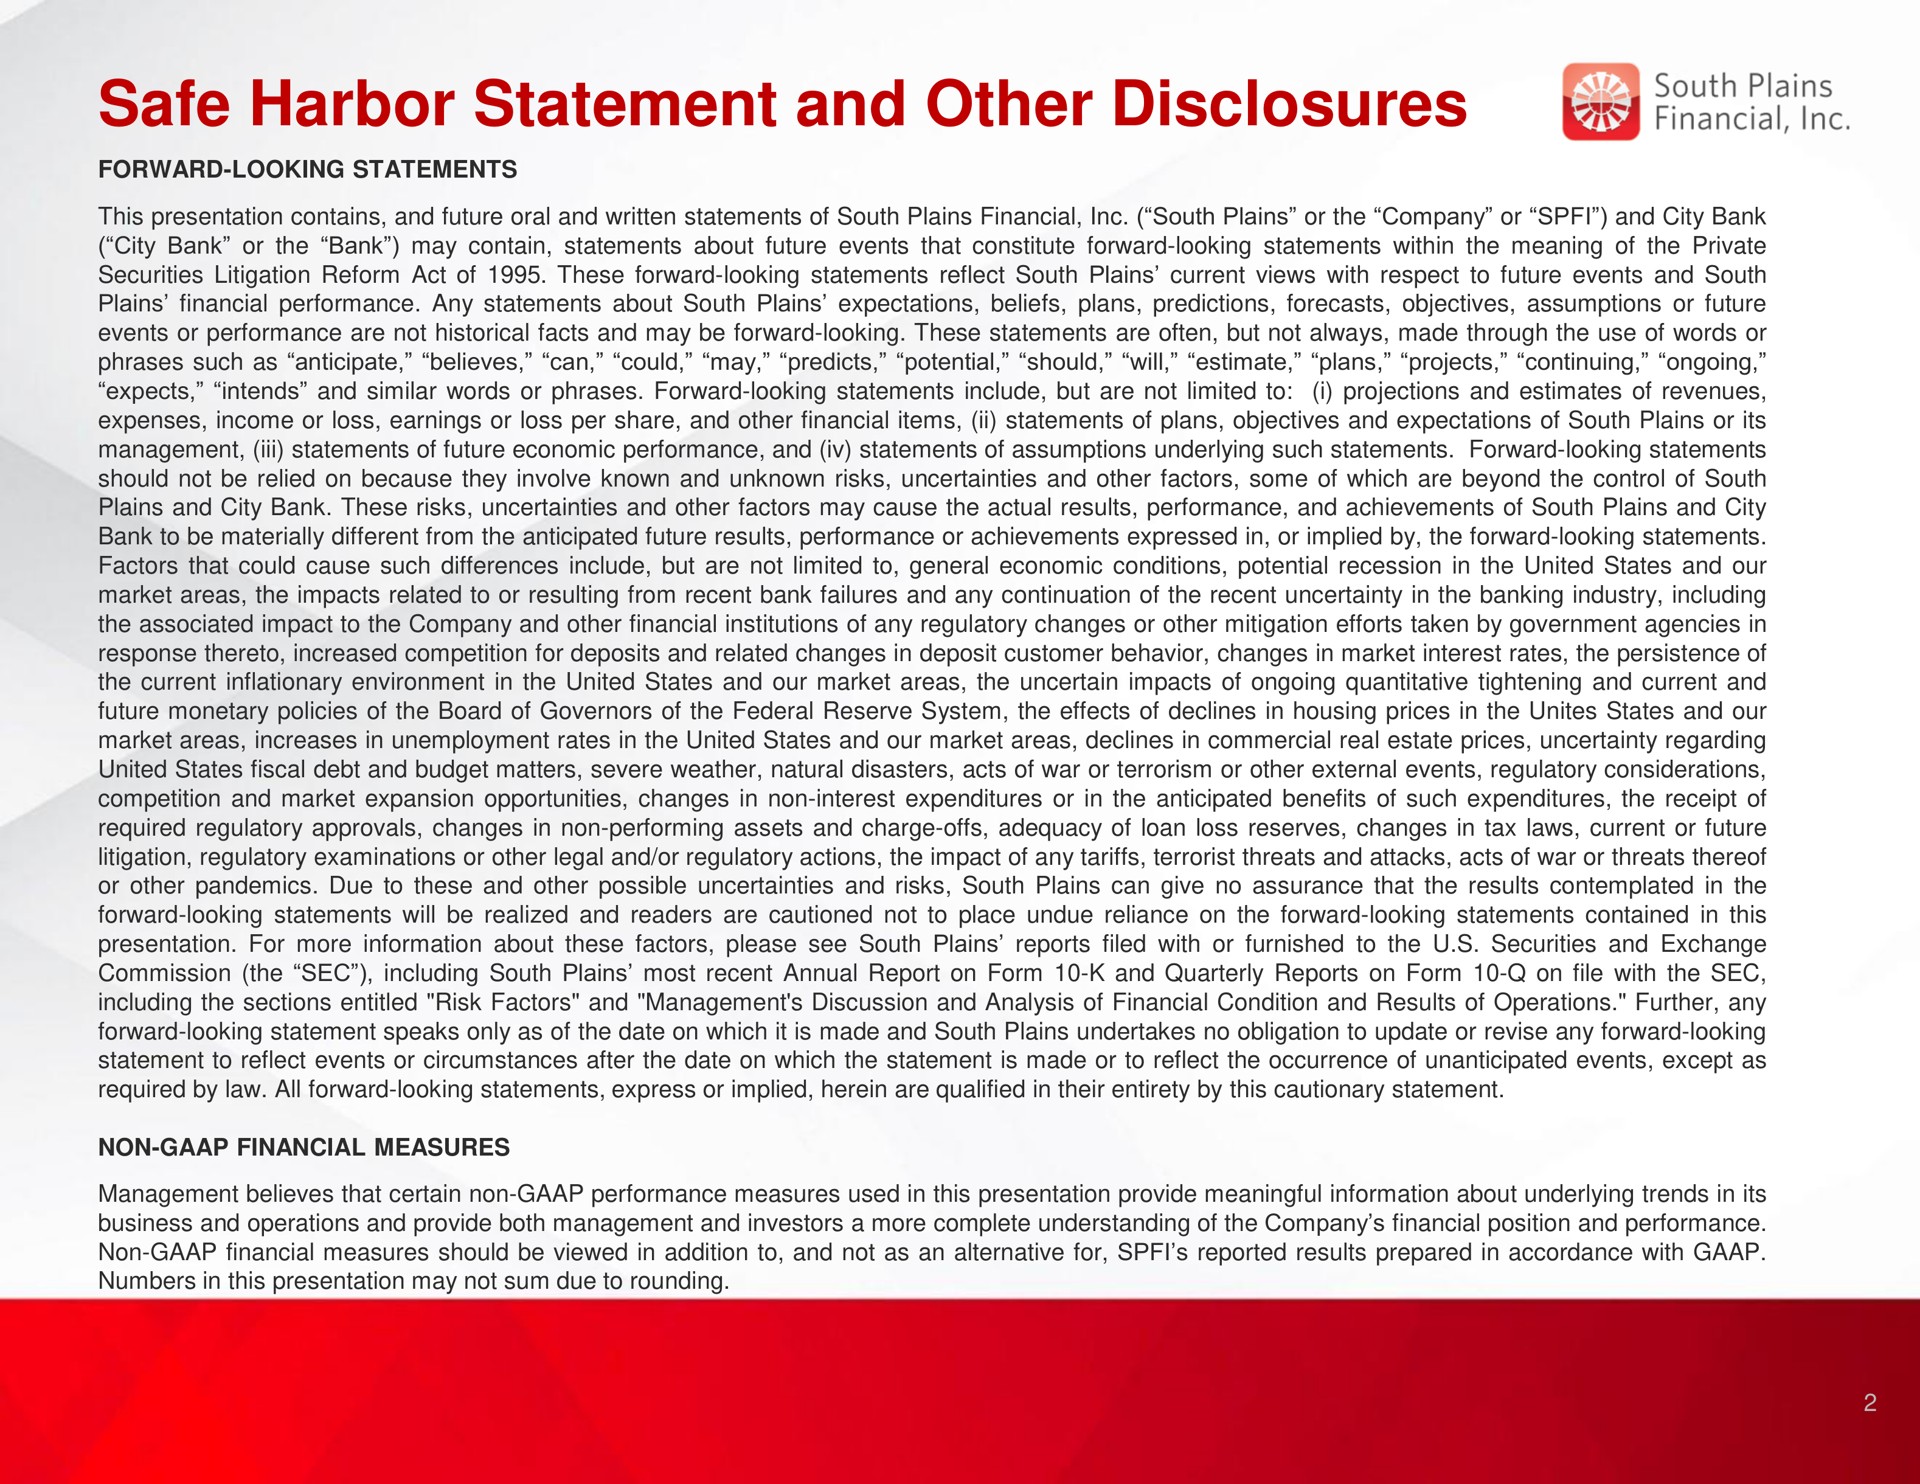 safe harbor statement and other disclosures bag | South Plains Financial